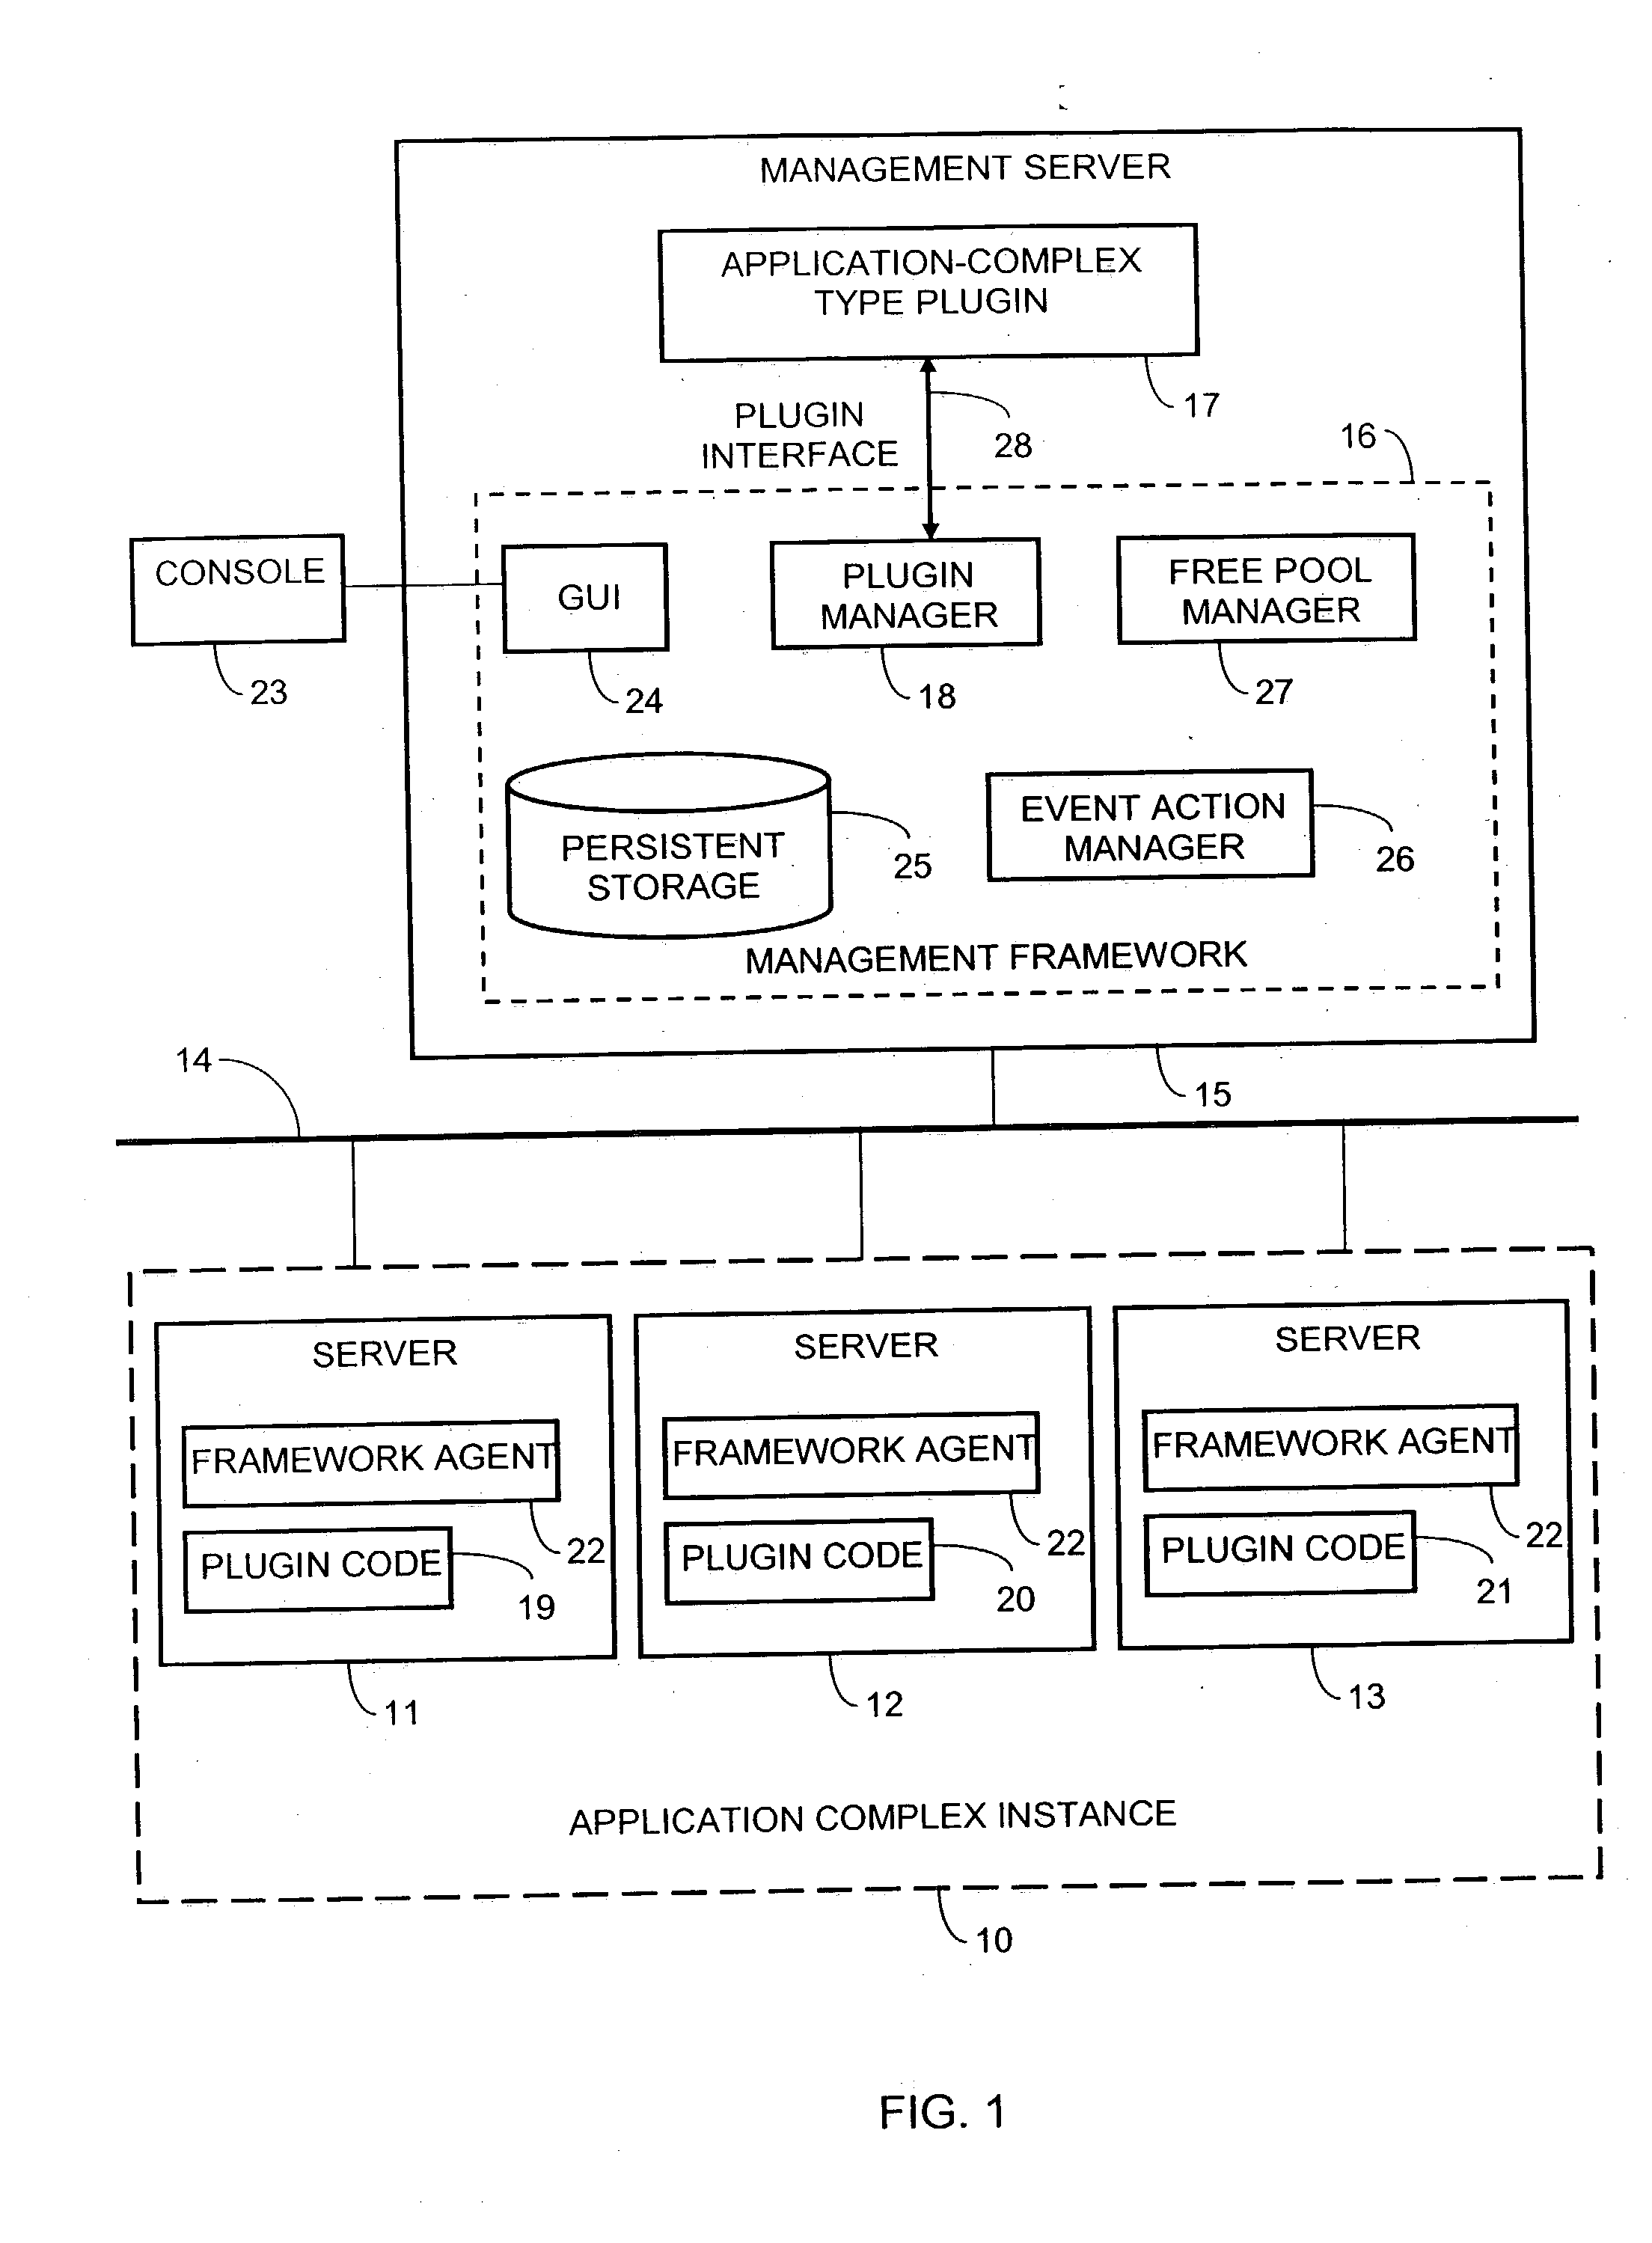 Method and system for managing multi-tier application complexes